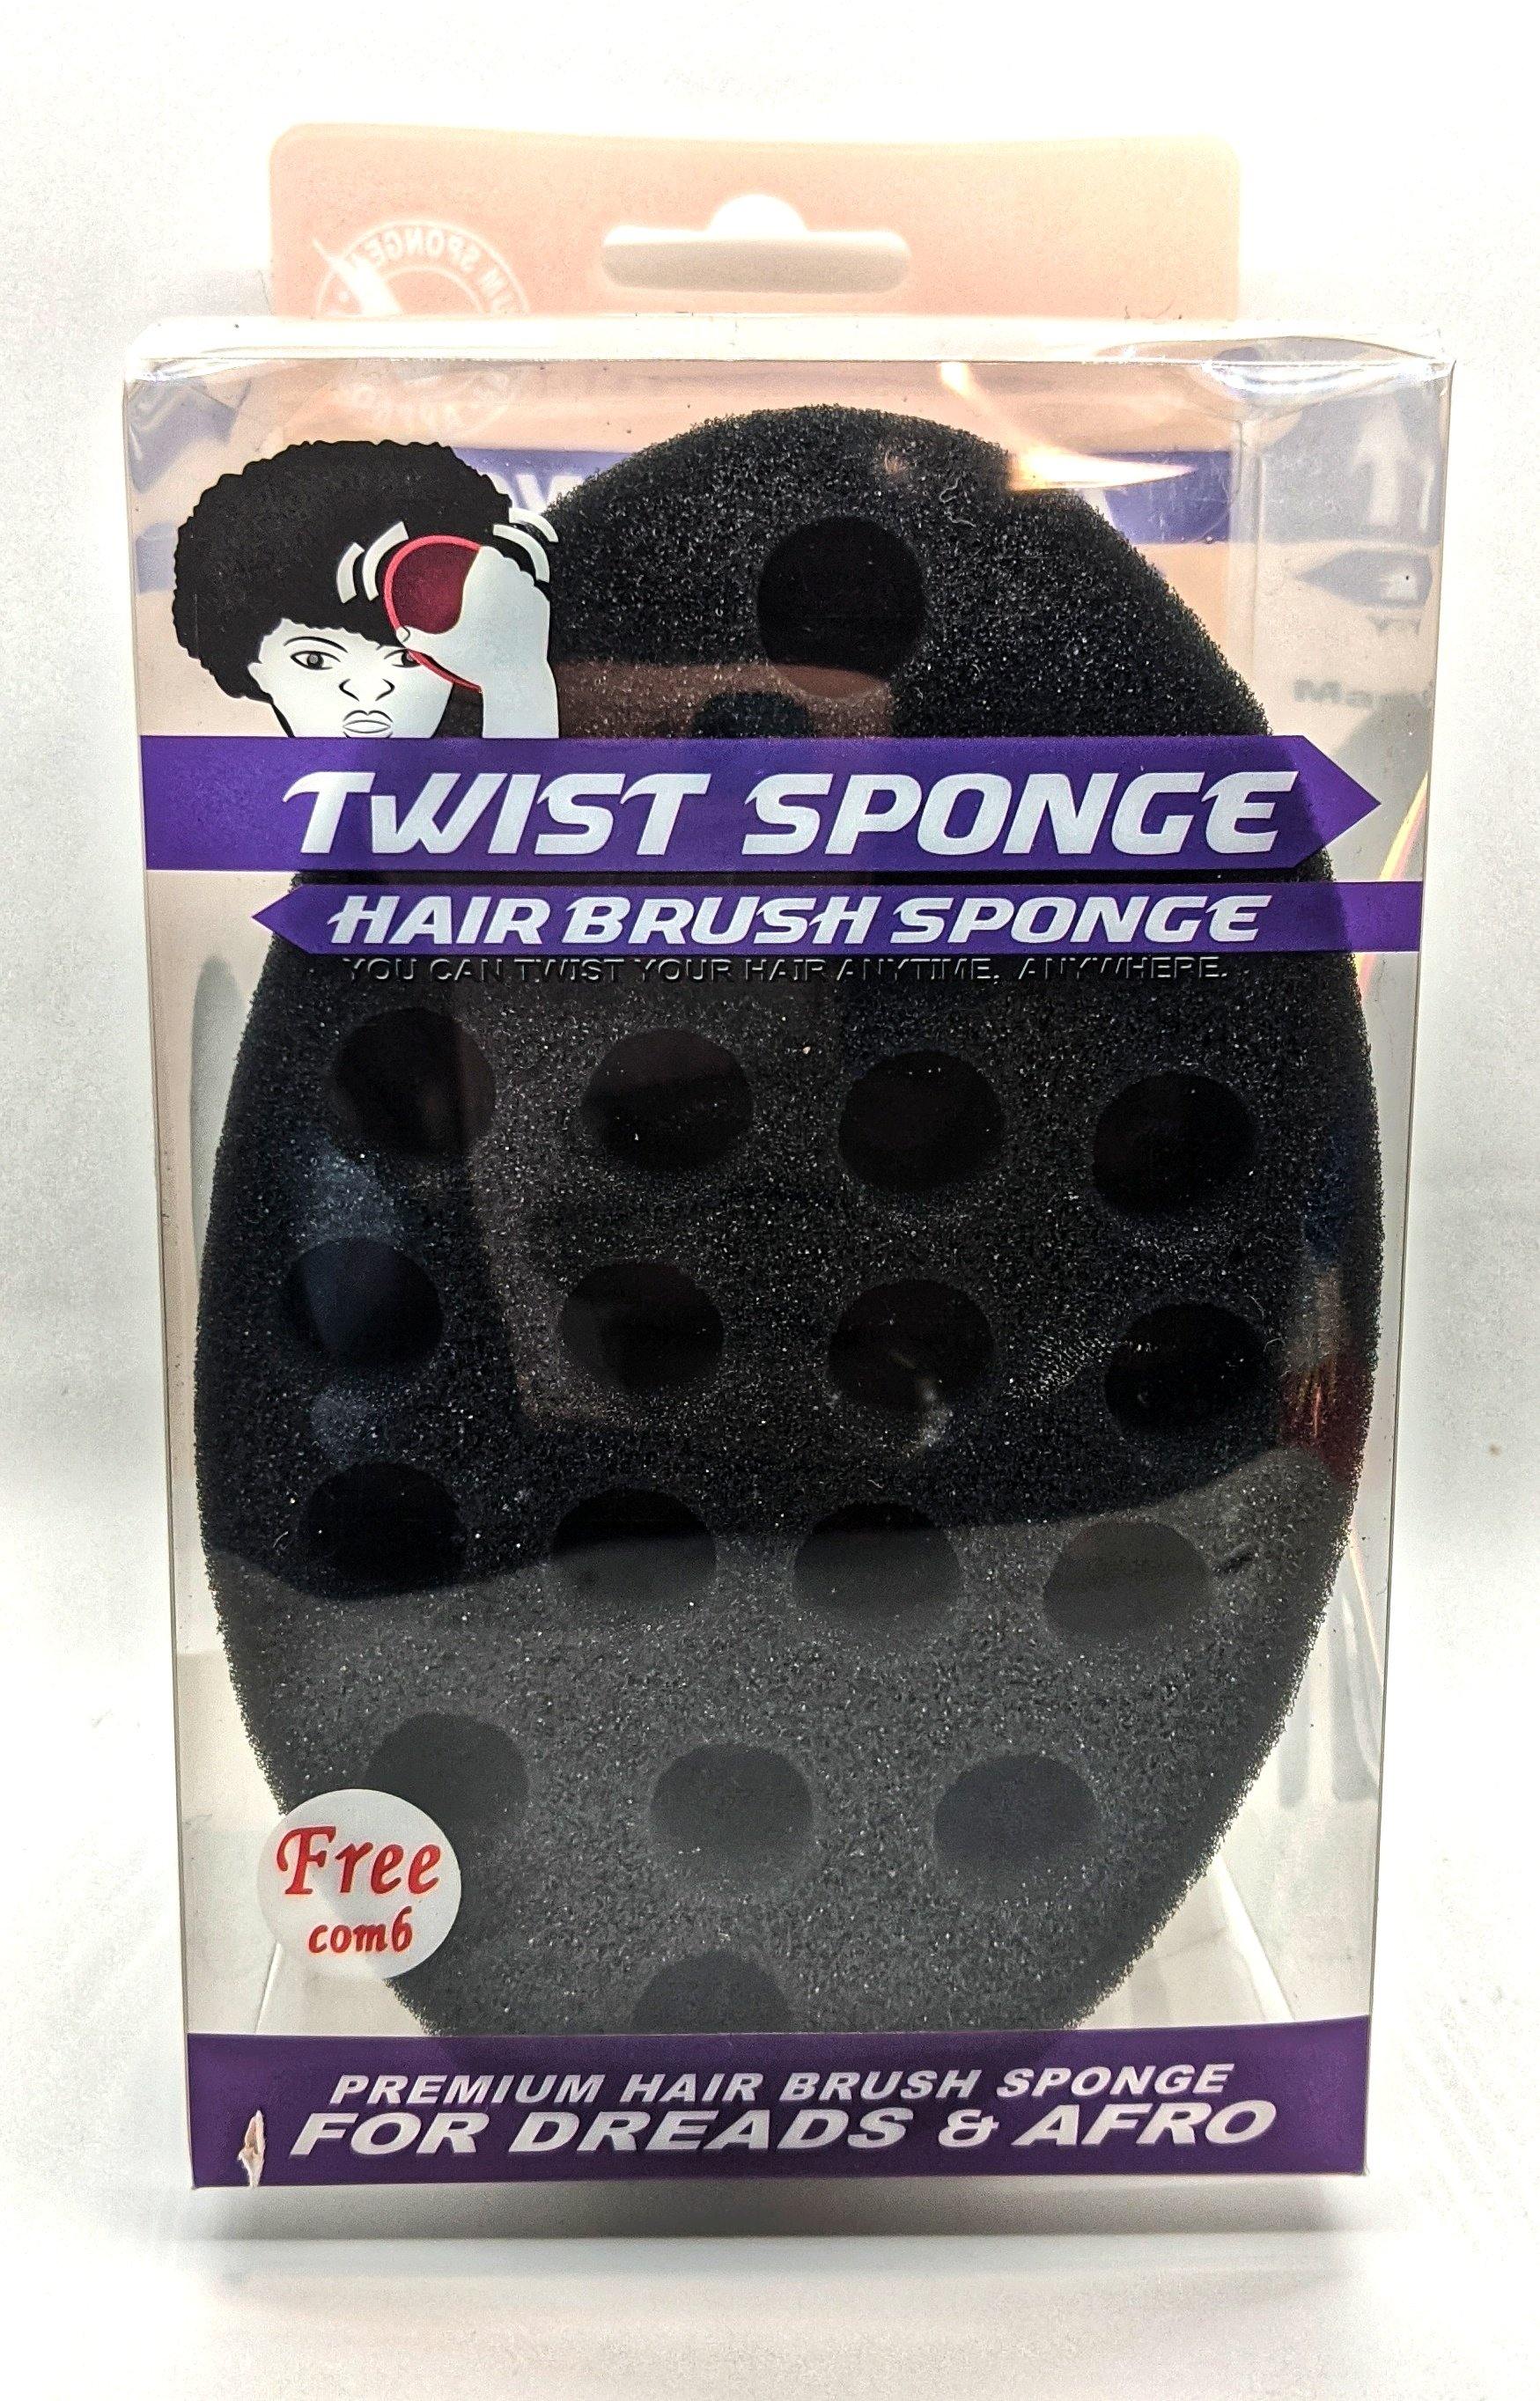 Hair Twist Sponge for creating twists (afros and naturally kinky curly hair )- 2 Size Options - True Elegance Beauty Supply